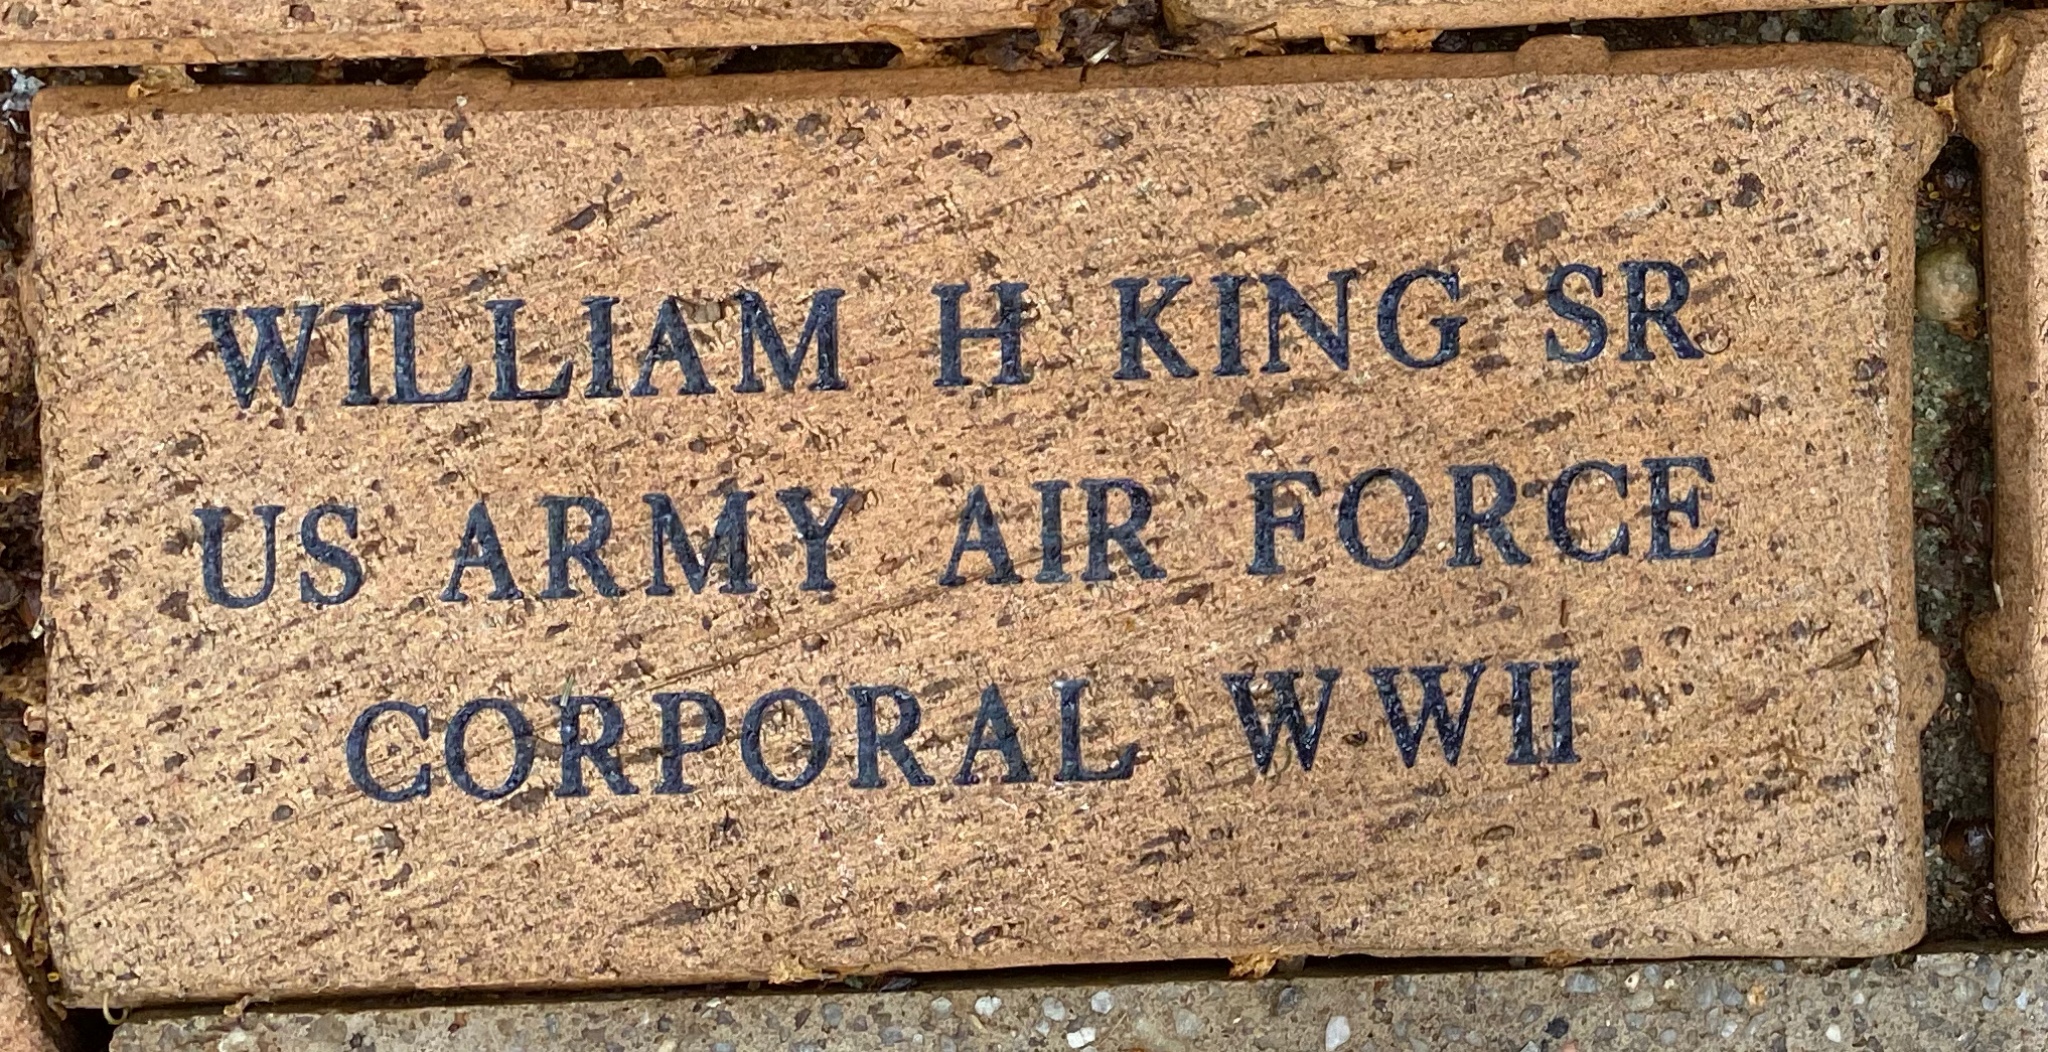 WILLIAM H KING SR US ARMY AIR FORCE CORPORAL WWII